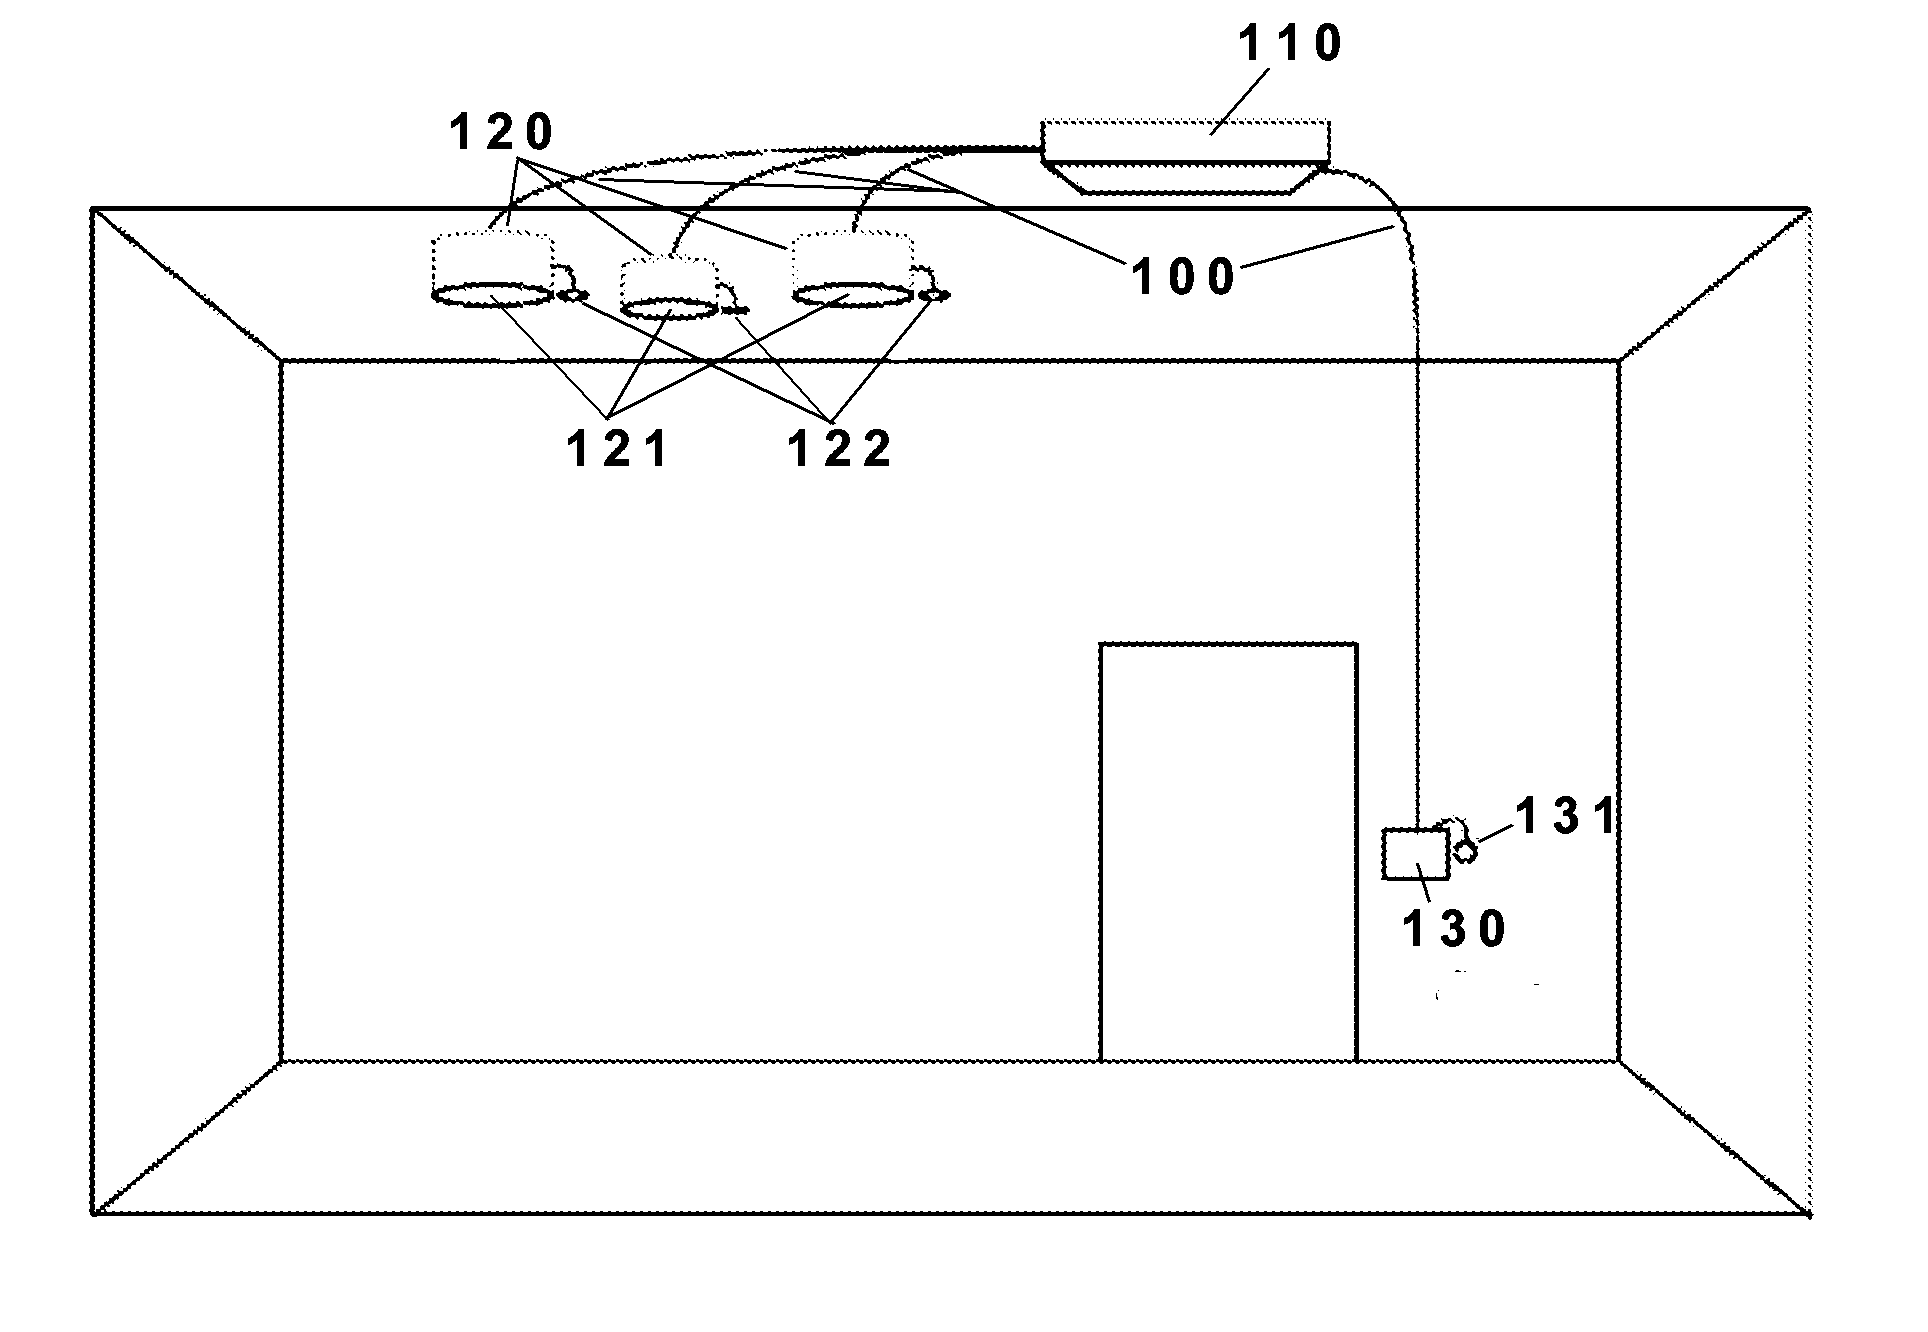 Lighting systems and methods of auto-commissioning